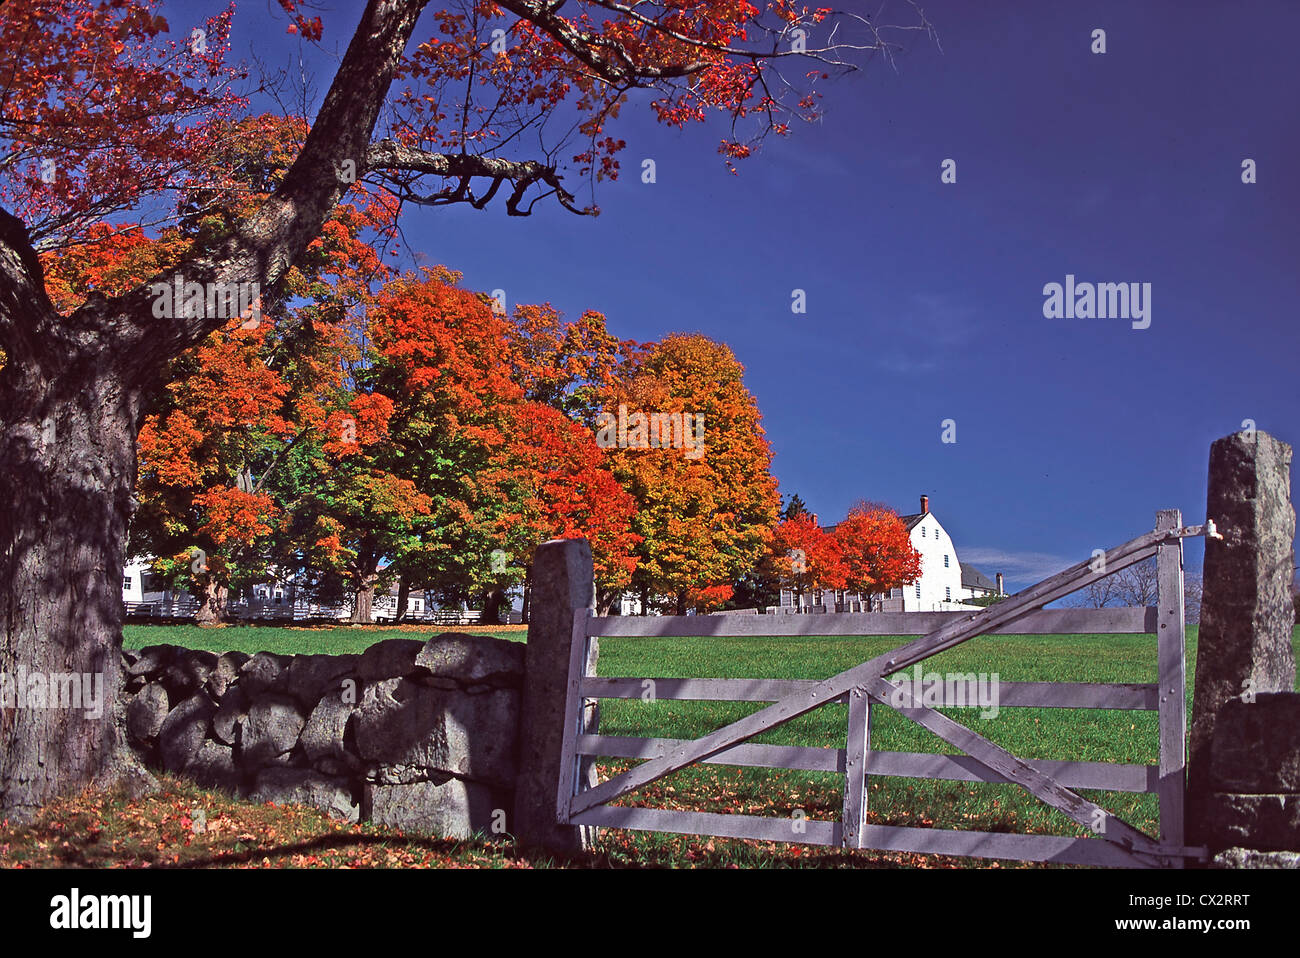 The Shaker Village in Canterberry Center, New Hamsphire, New England Stock Photo